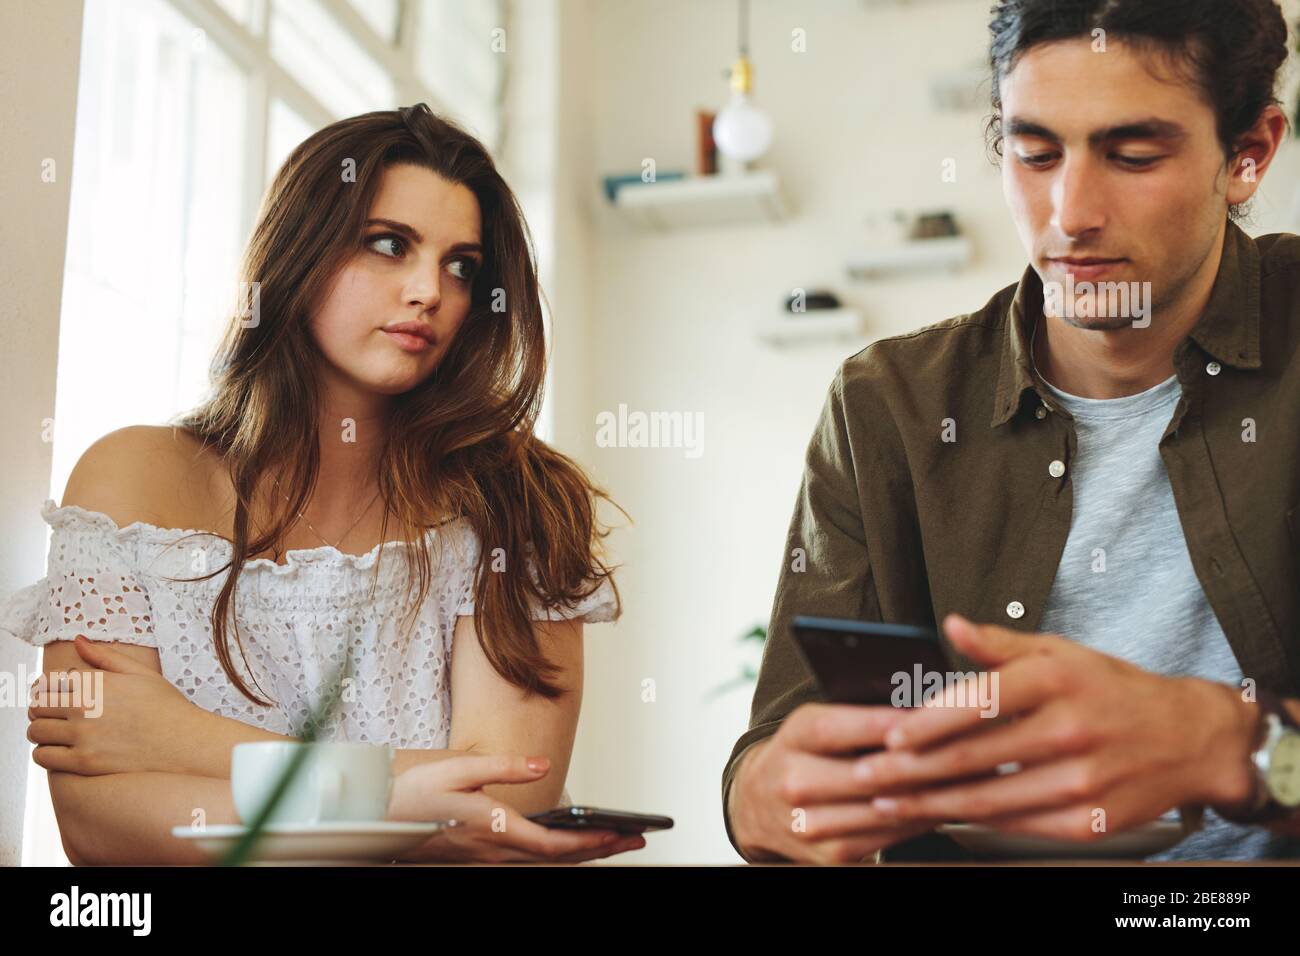 Woman looking unhappy while her man paying no attention to her and busy using his mobile phone. Sulking woman sitting next to man reading text message Stock Photo